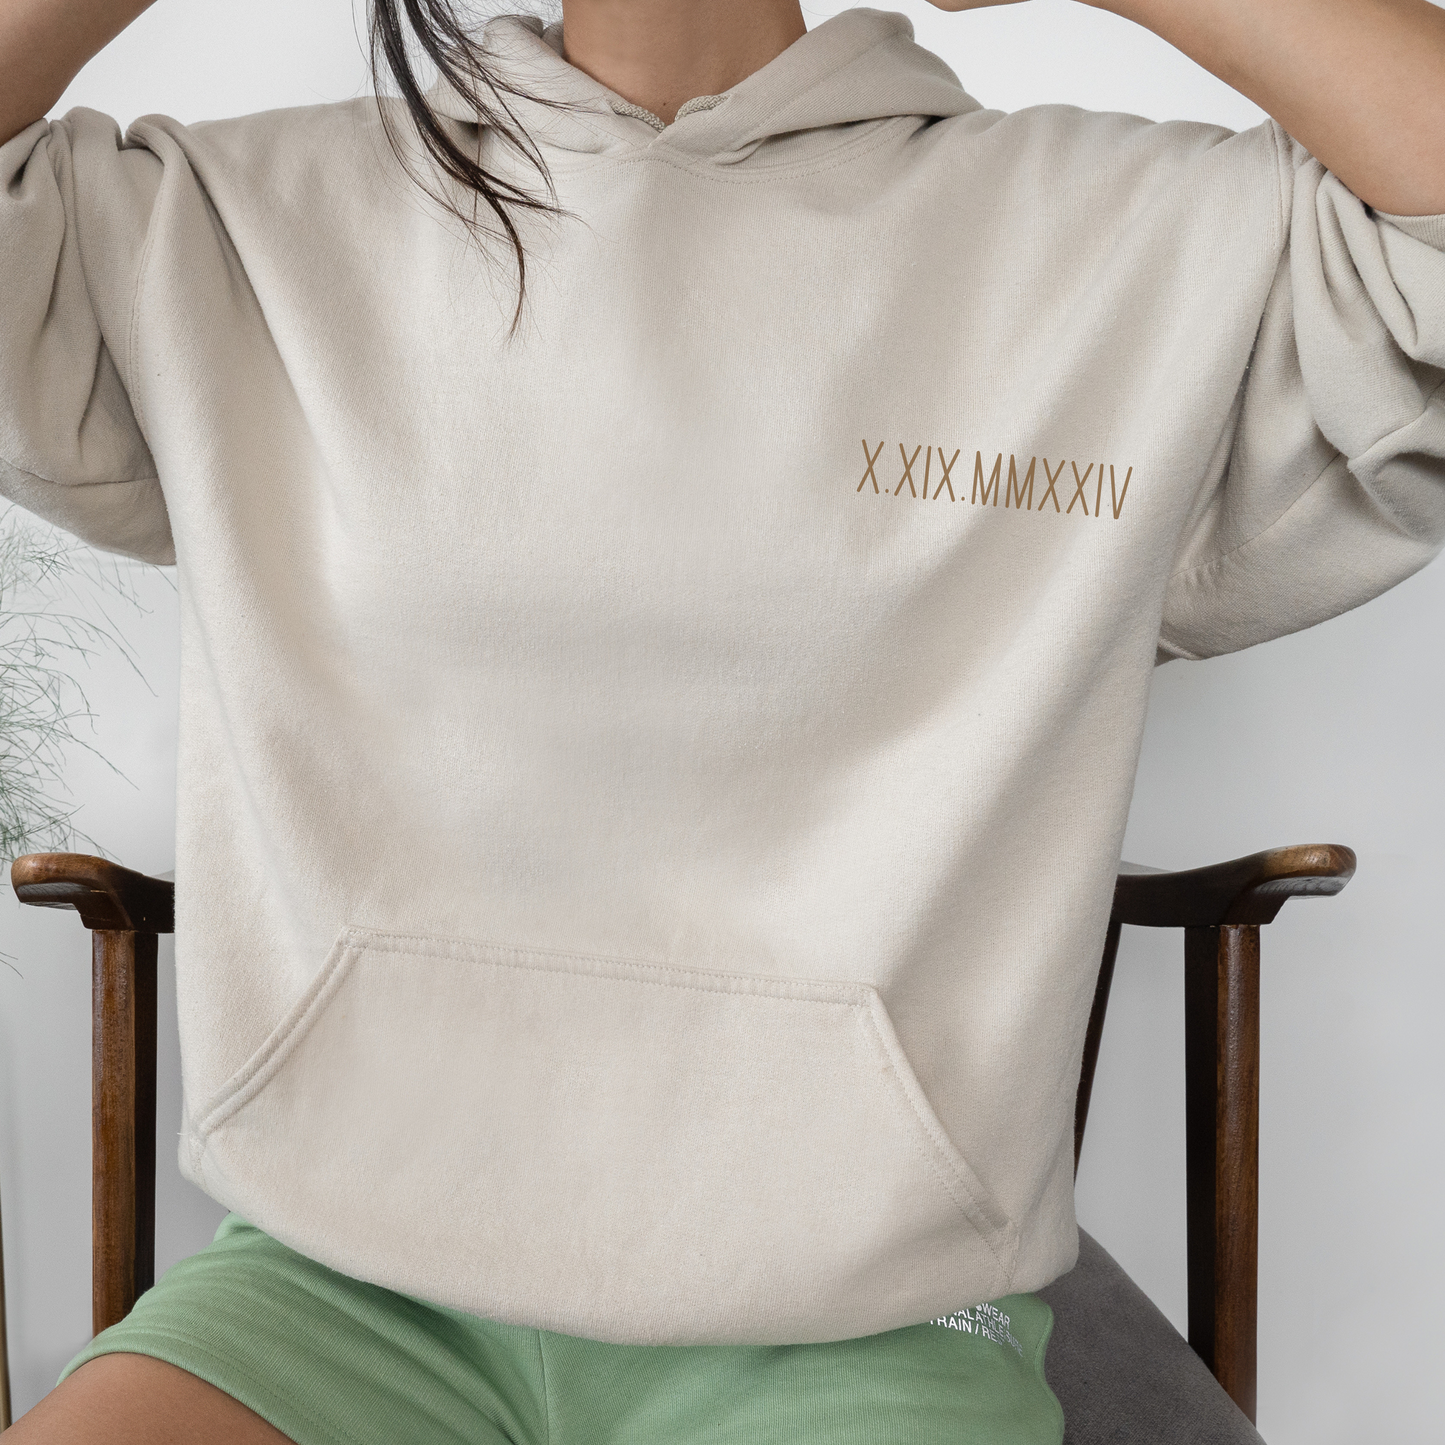 custom roman numeral hoodie, couples gift, personalized date and initial hoodie, engagements, anniversary, anniversaries, bachelor gift, bachelorette gift, bridesmaid gift, birthday gift for her, valentines gift, gift for him, minimalist couples hoodie